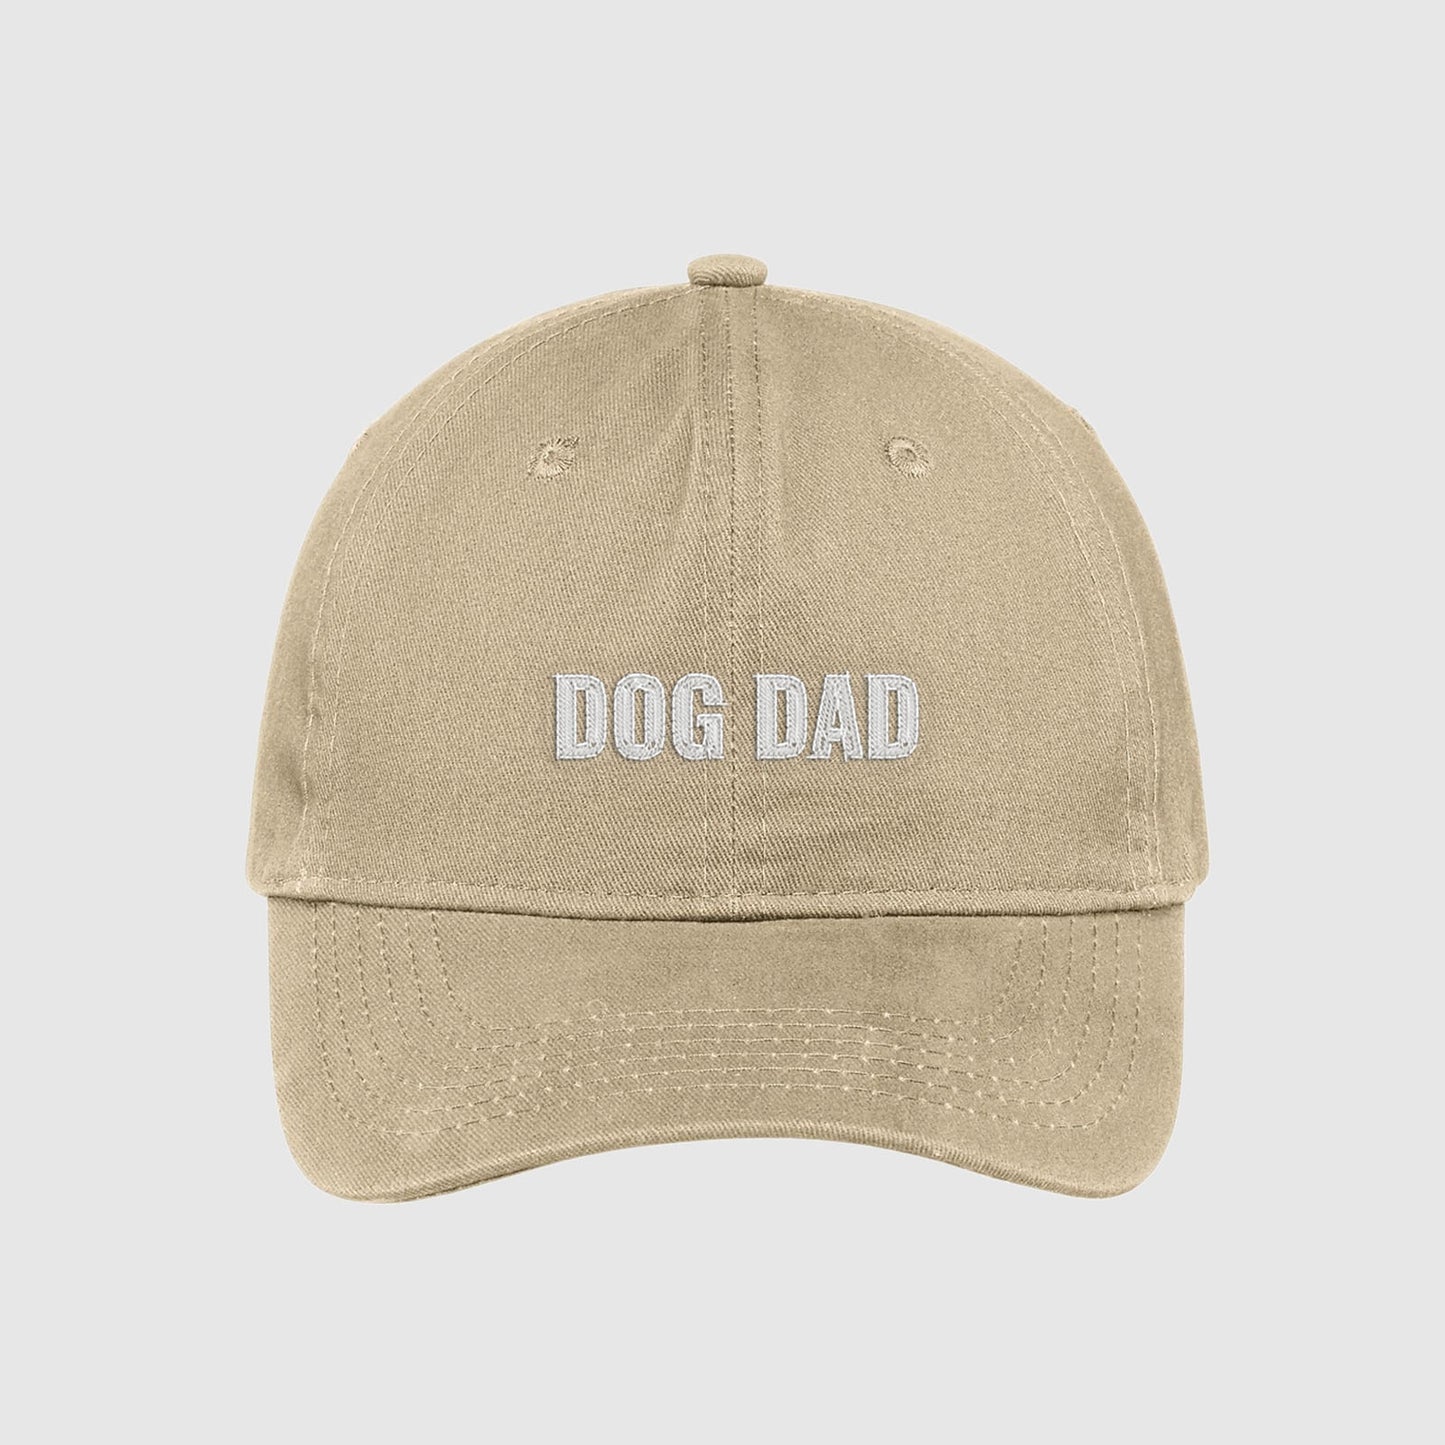 Tan Dog Dad Hat embroidered with white text